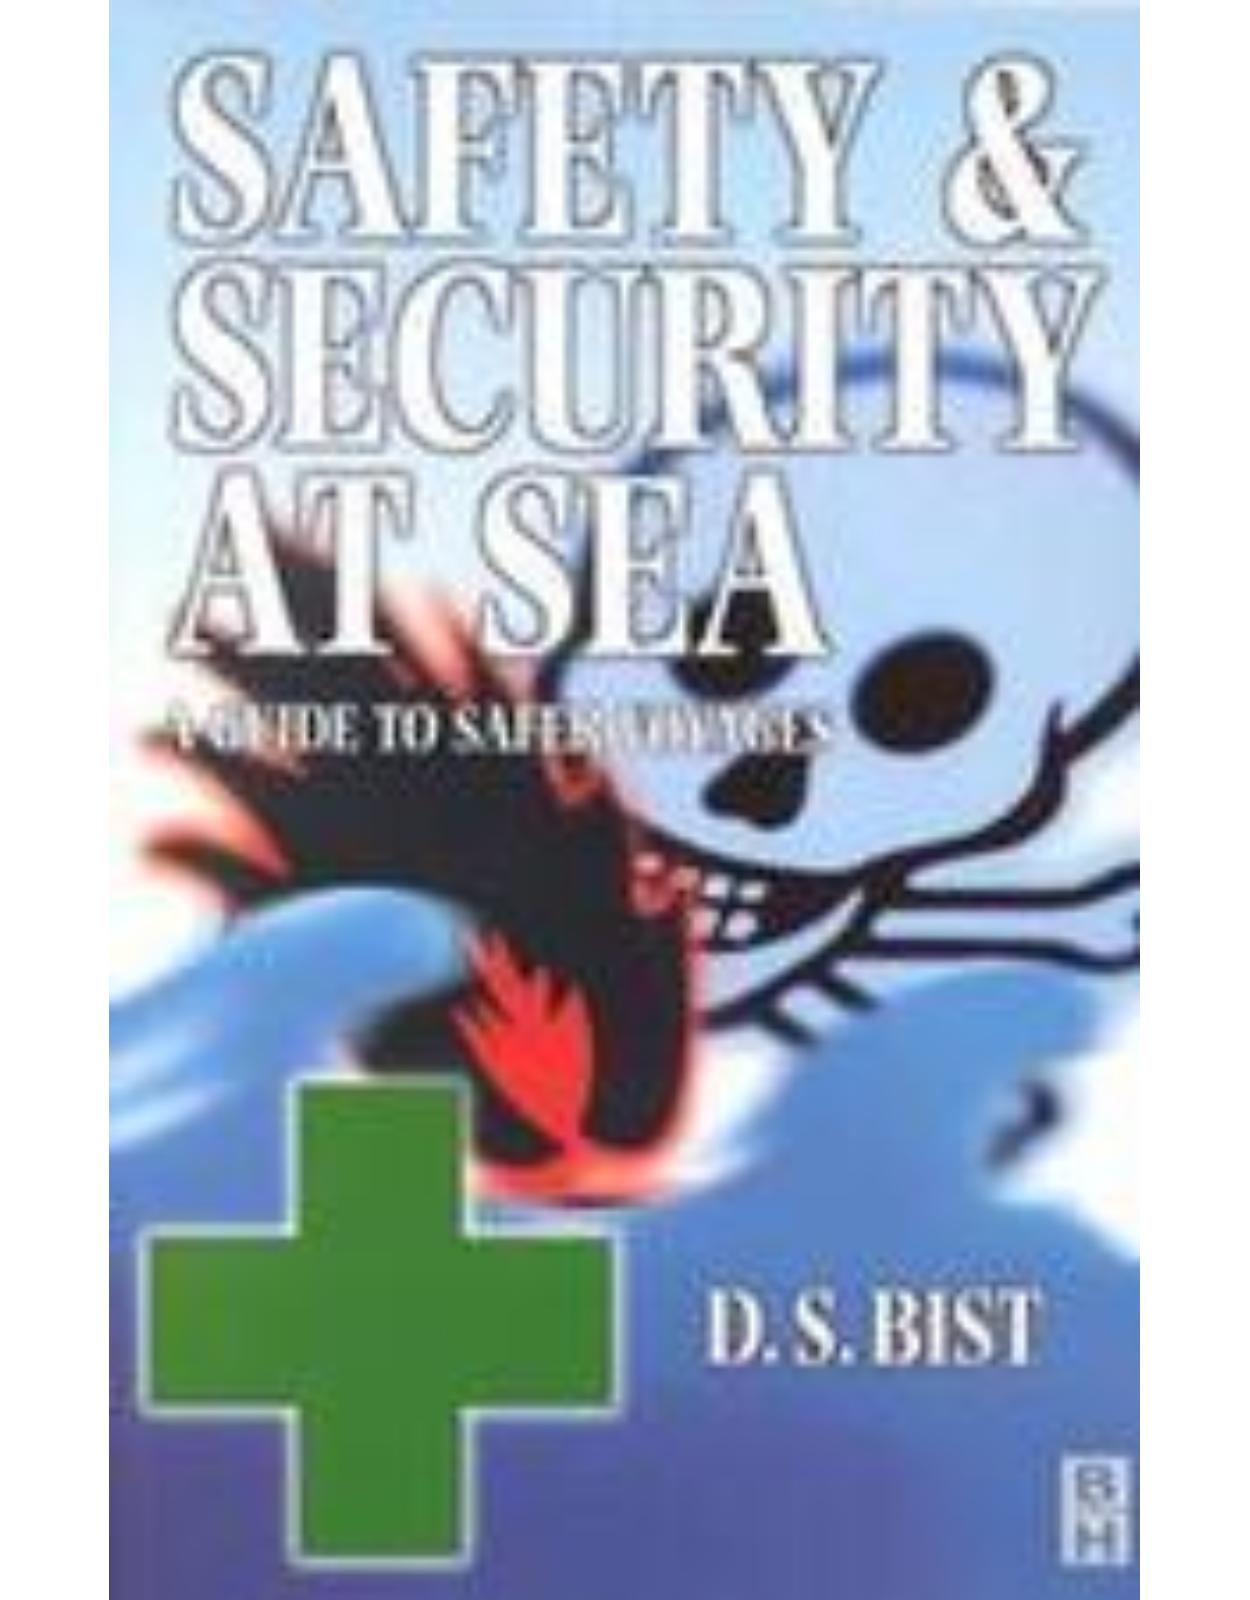 Safety and Security at Sea